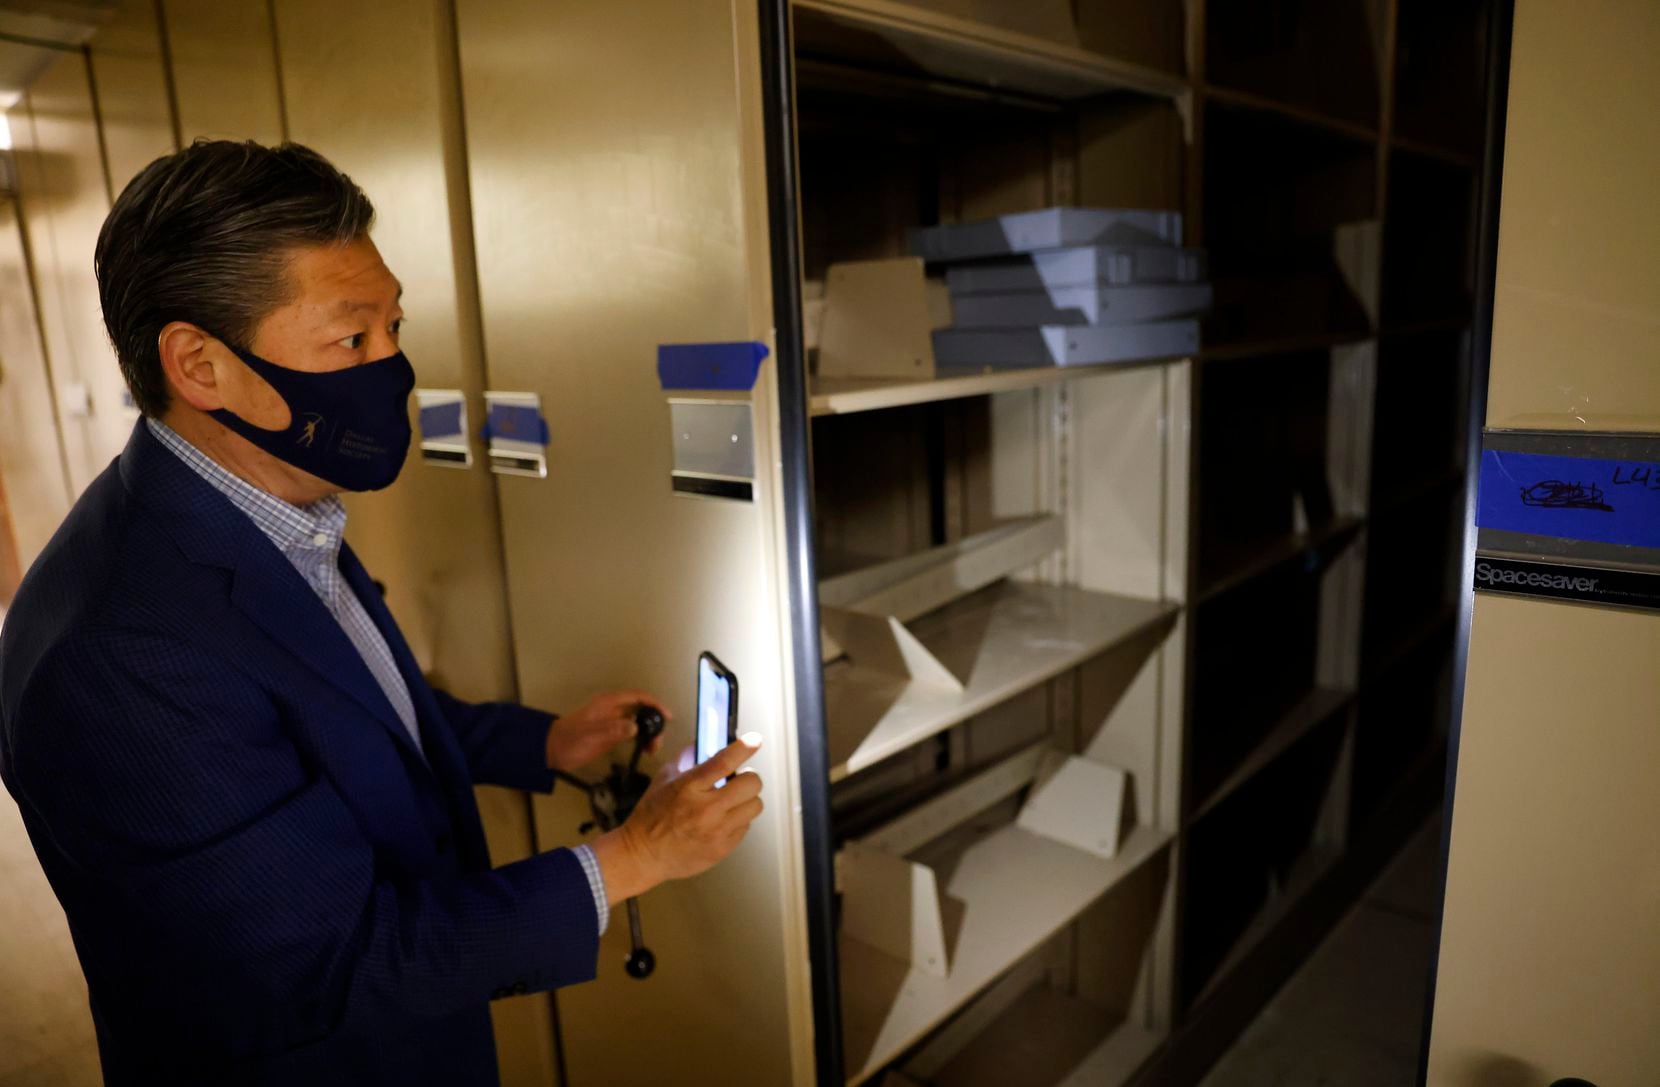 Karl Chiao, the executive director of the Dallas Historical Society, tours the archive room...